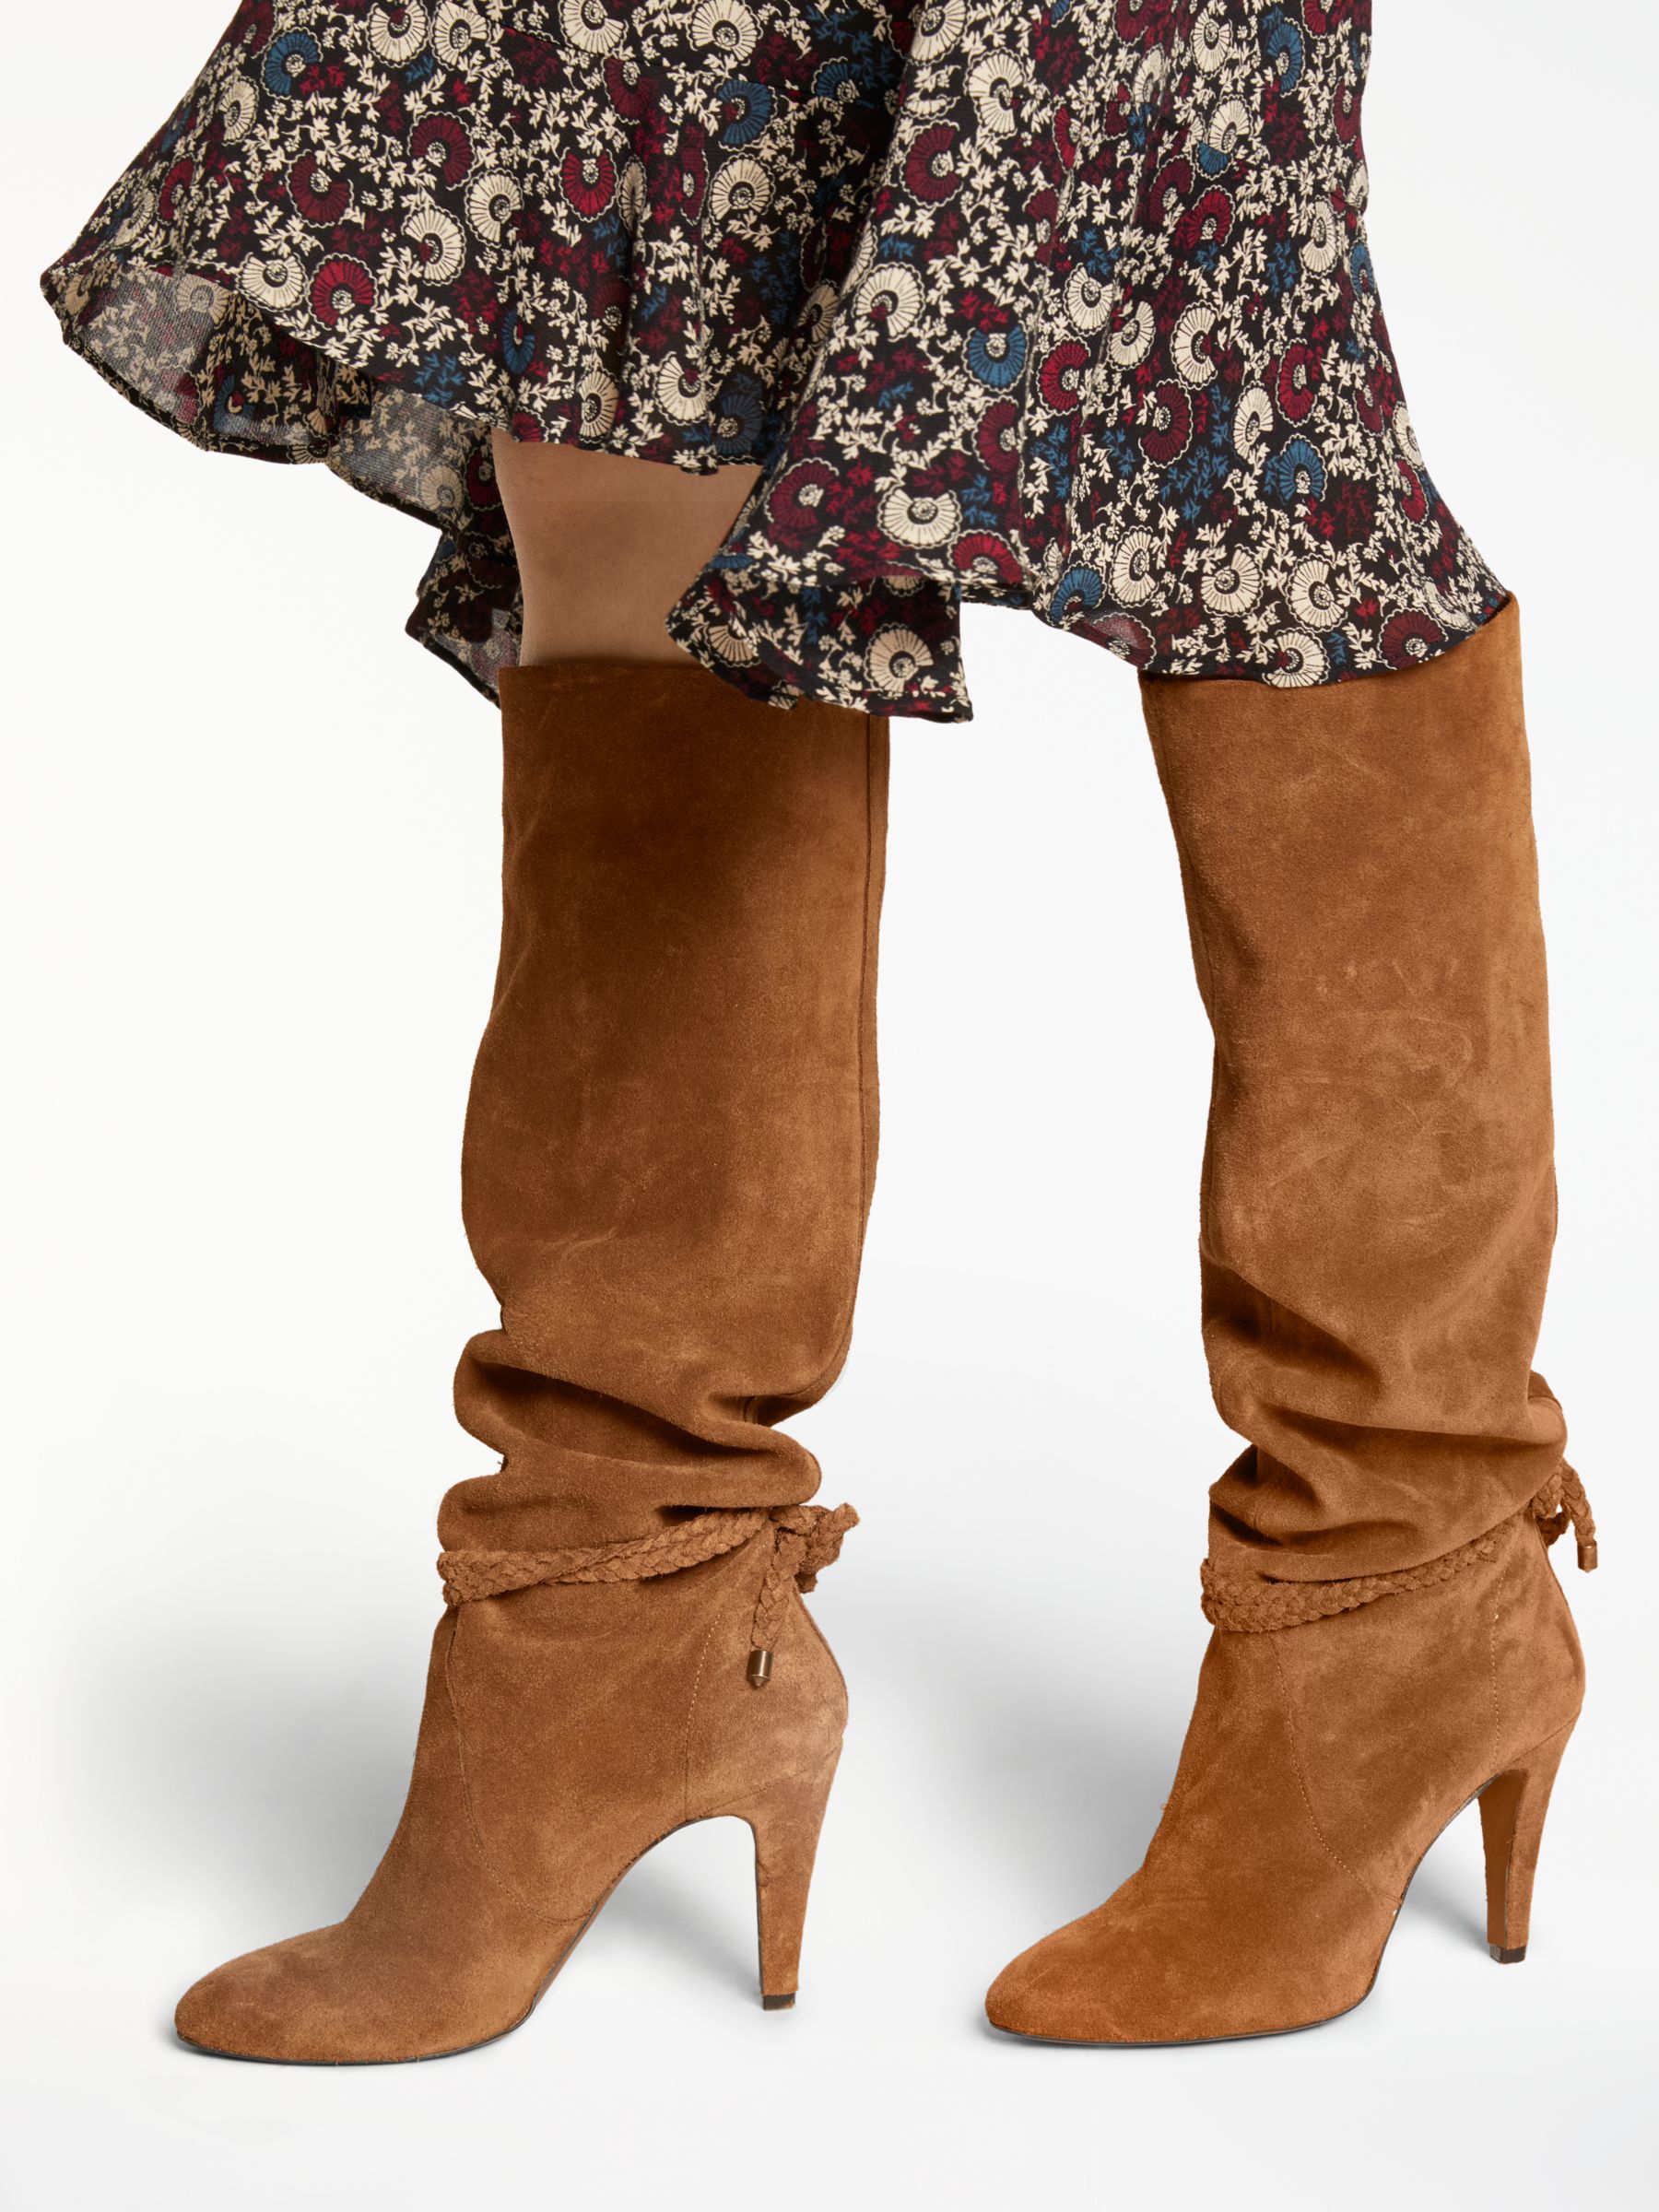 tan slouch boots